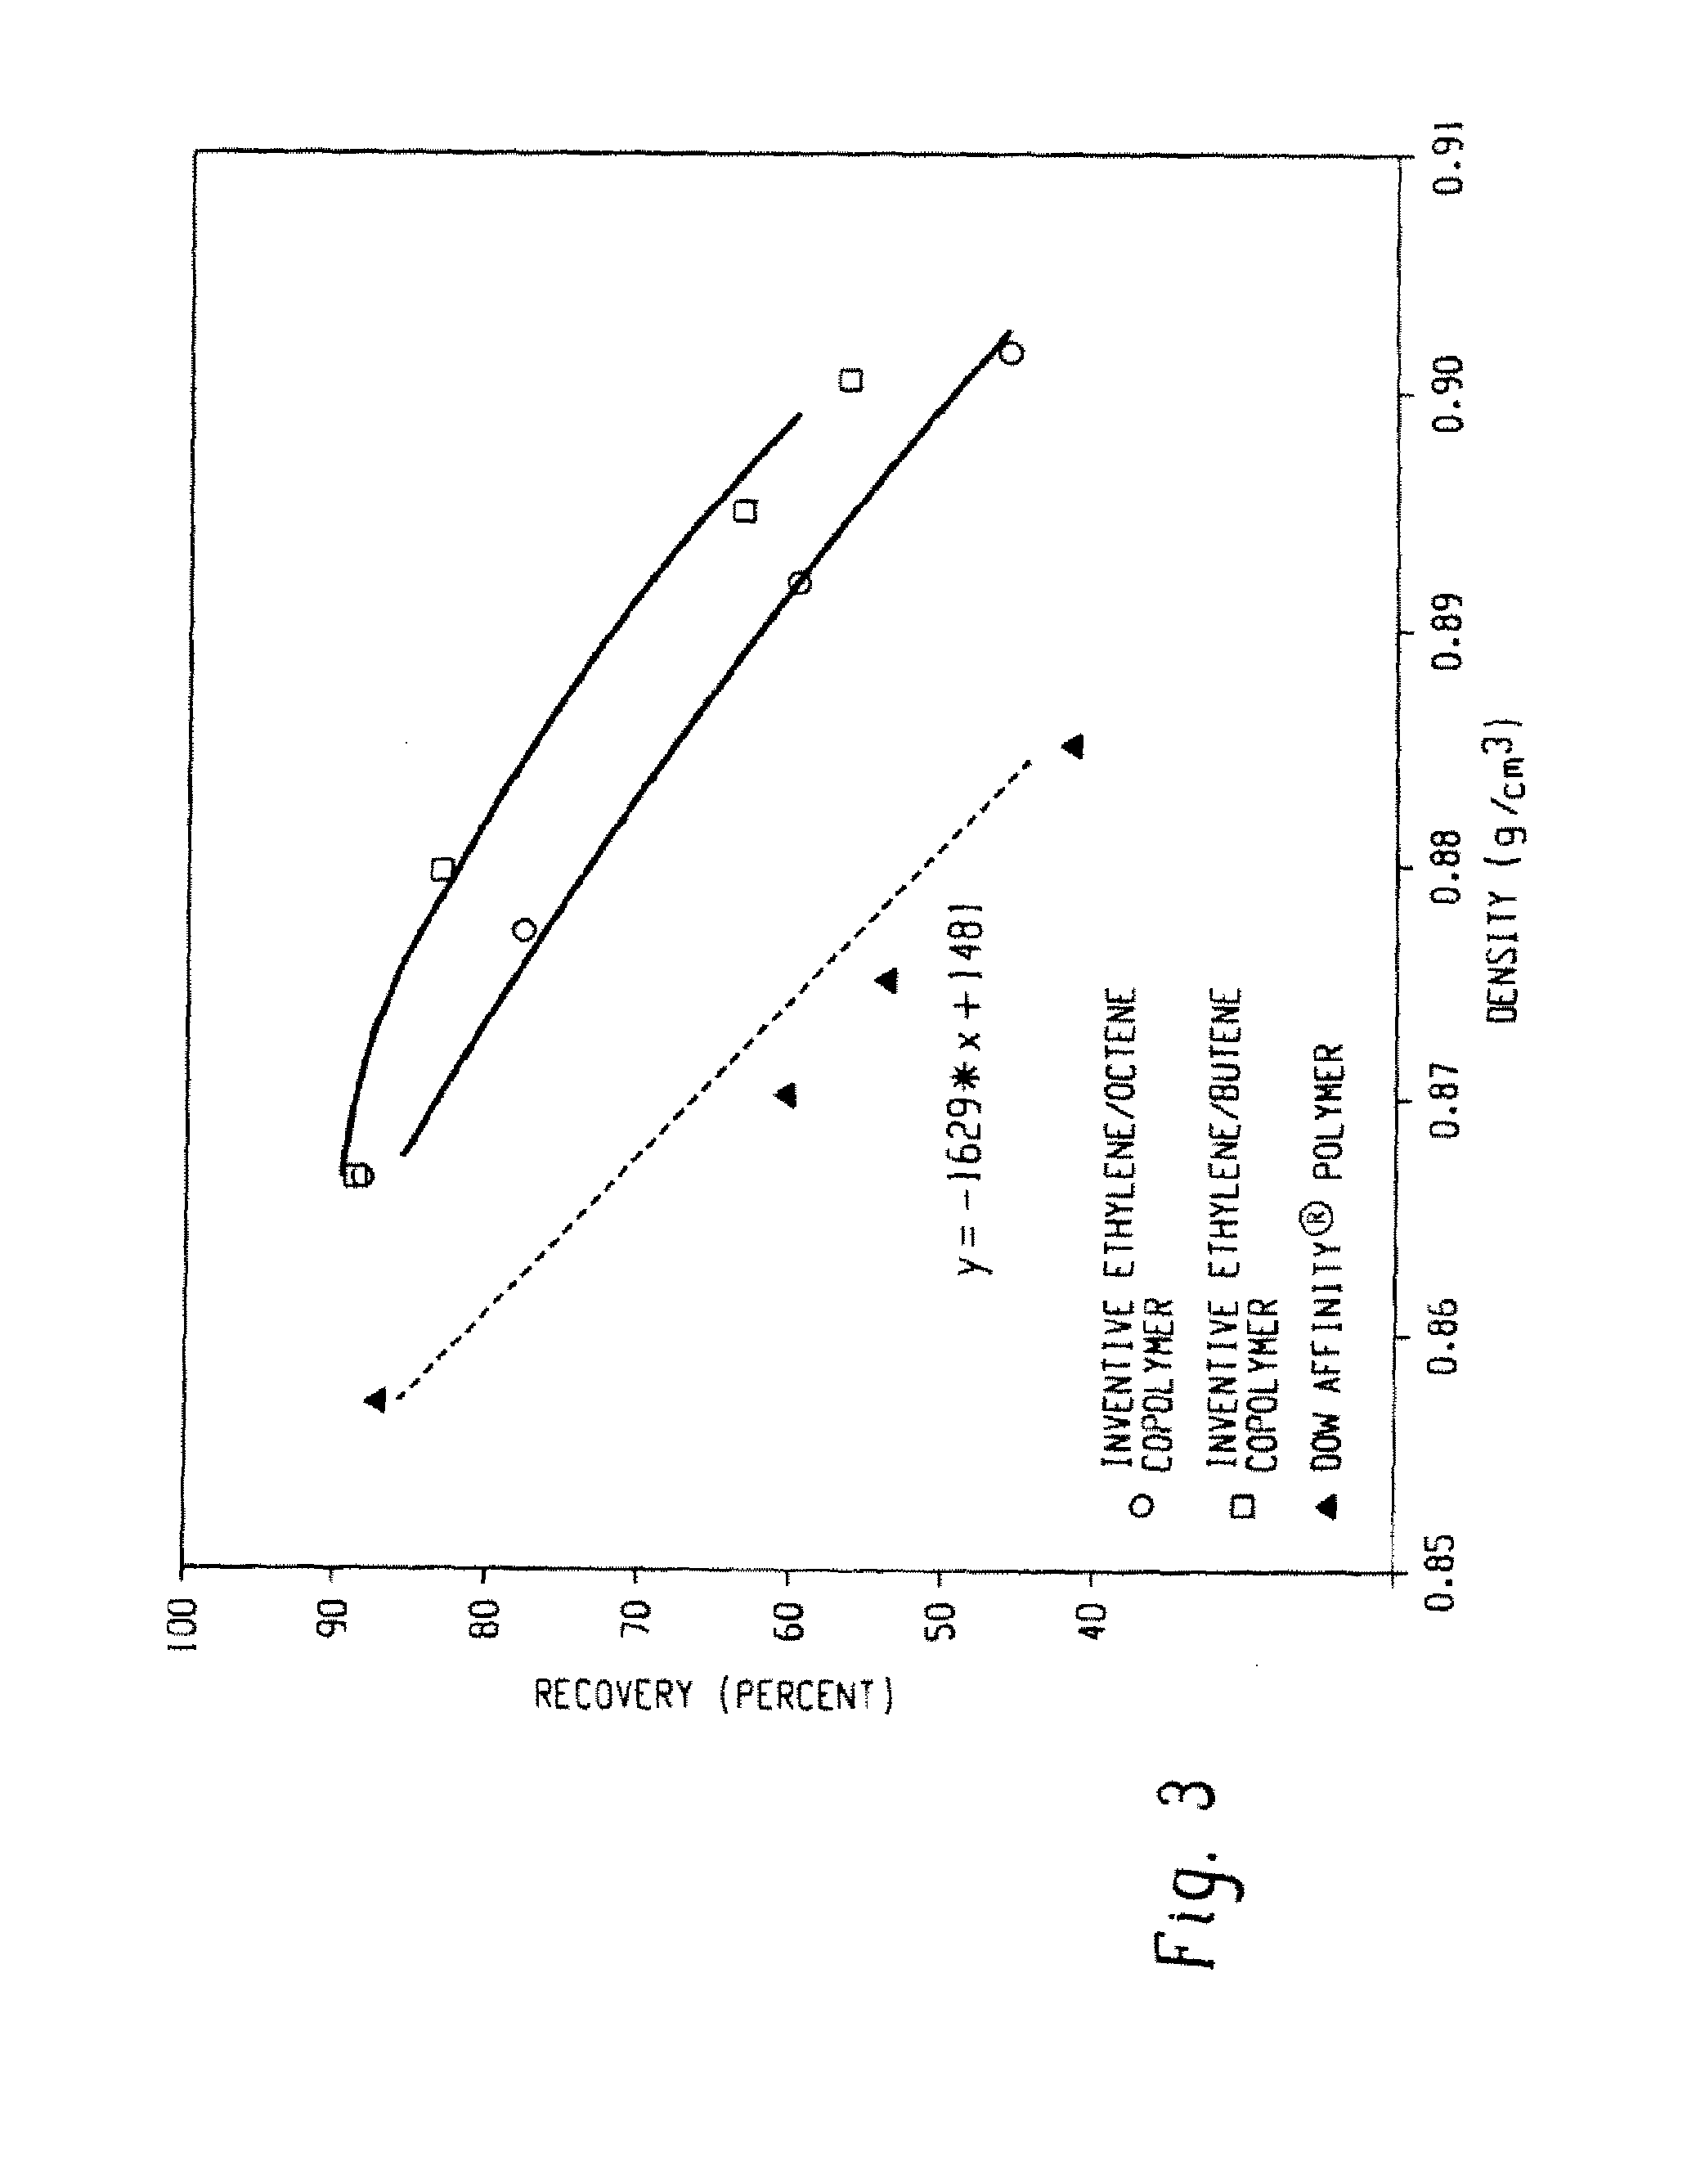 Polyolefin compositions and articles prepared therefrom, and methods for making the same